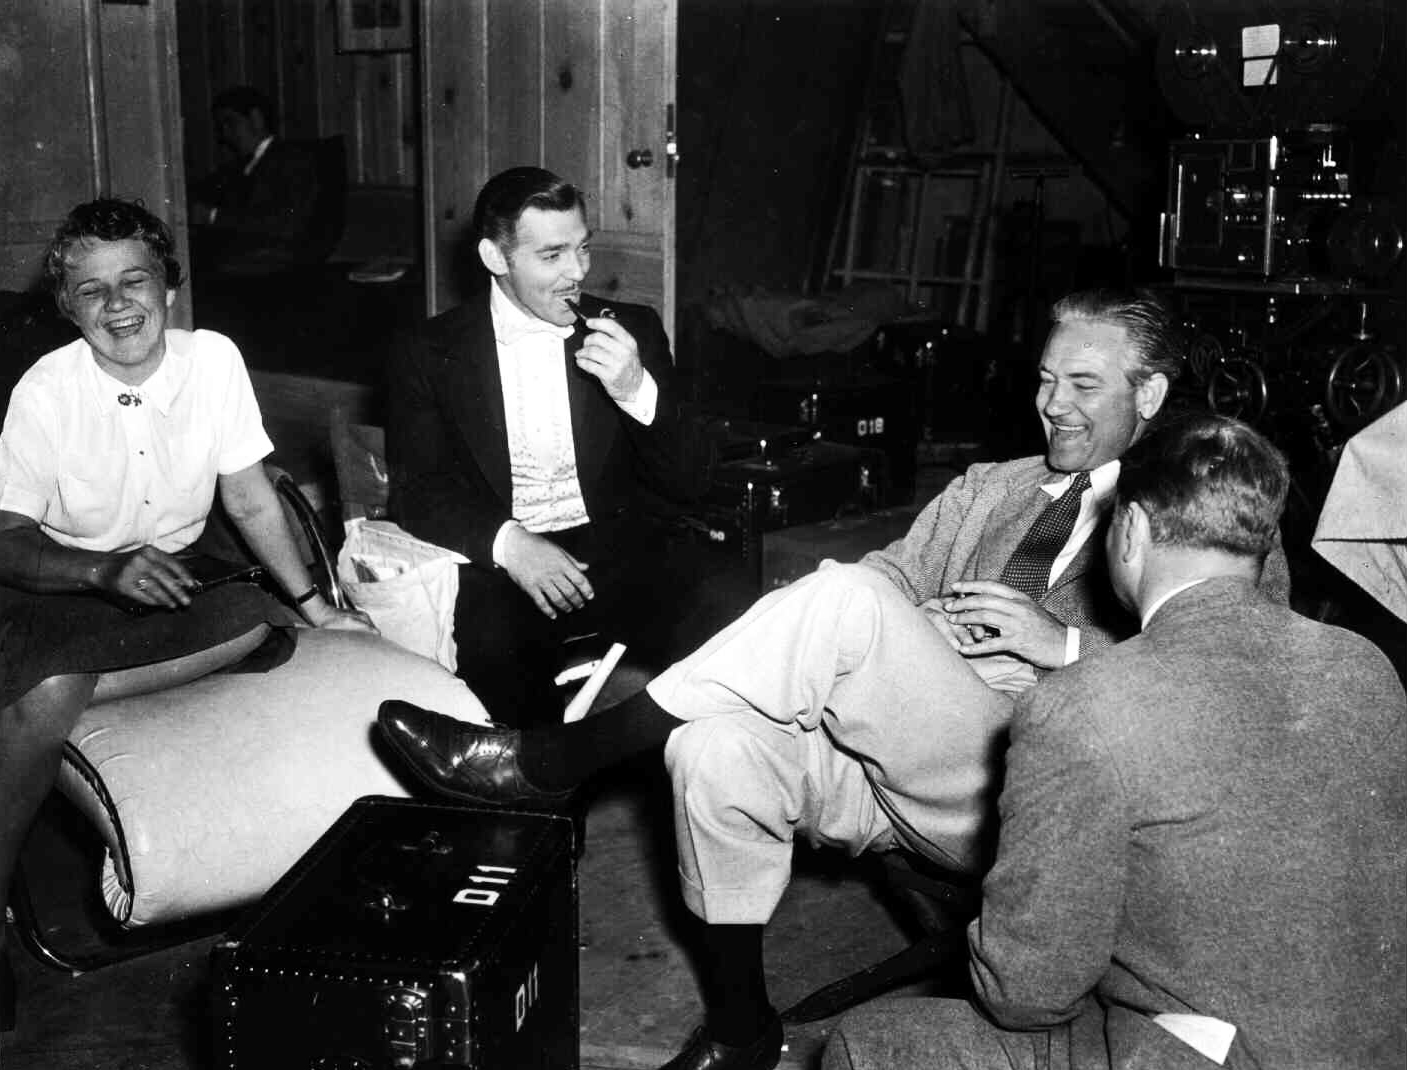 From left: Susan Myrick, Clark Gable, and Victor Fleming on the set of Gone with the Wind in 1939.